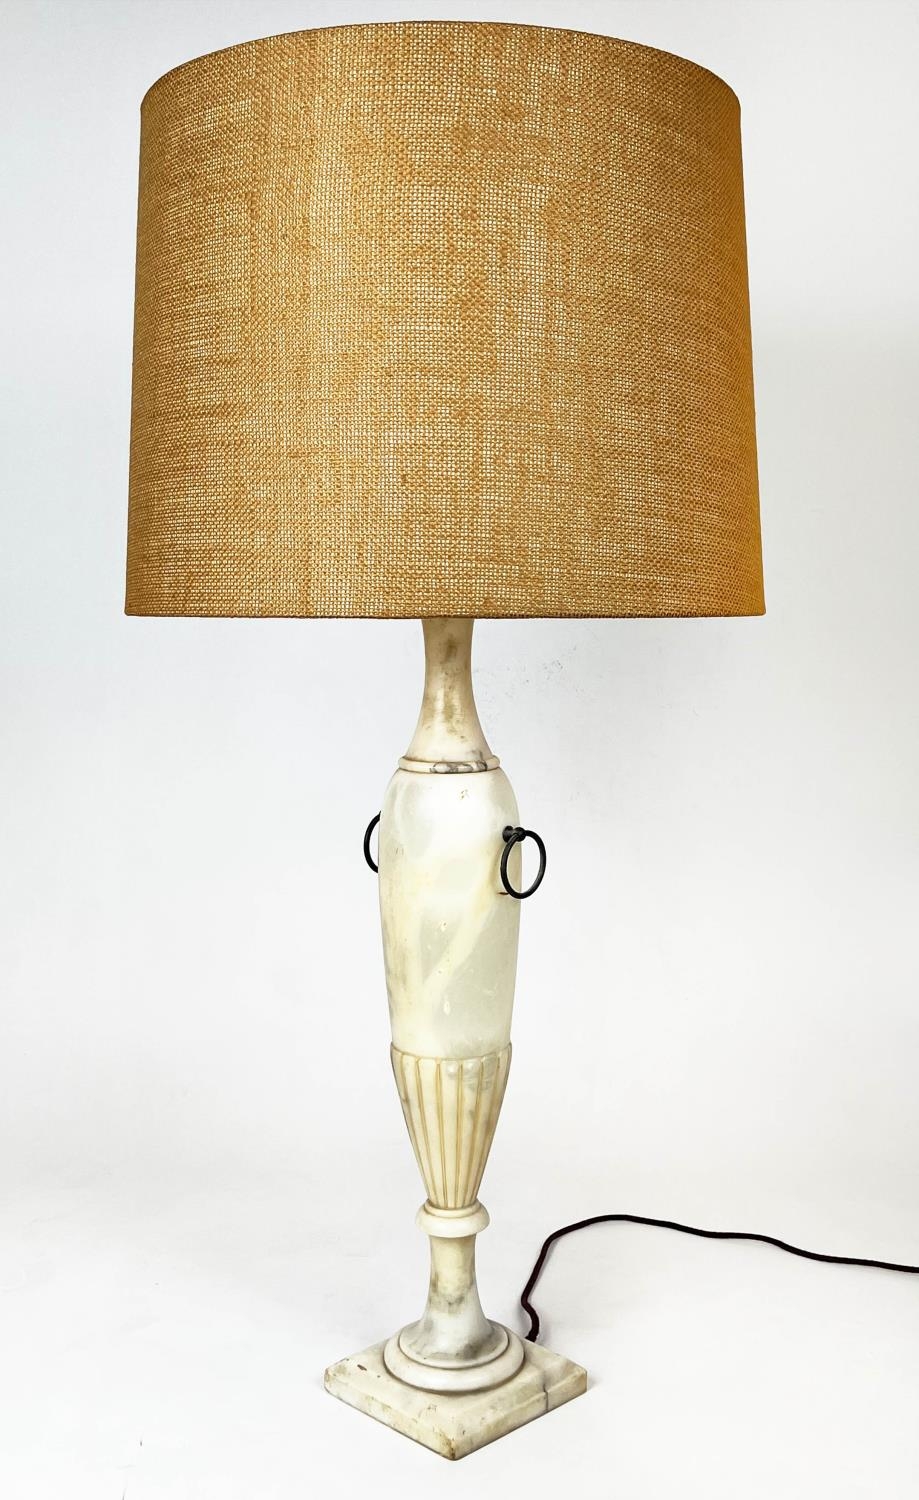 TABLE LAMP, Italian Grand Tour style, hand carved Alabaster, early/mid 20th century, with shade, - Image 2 of 5